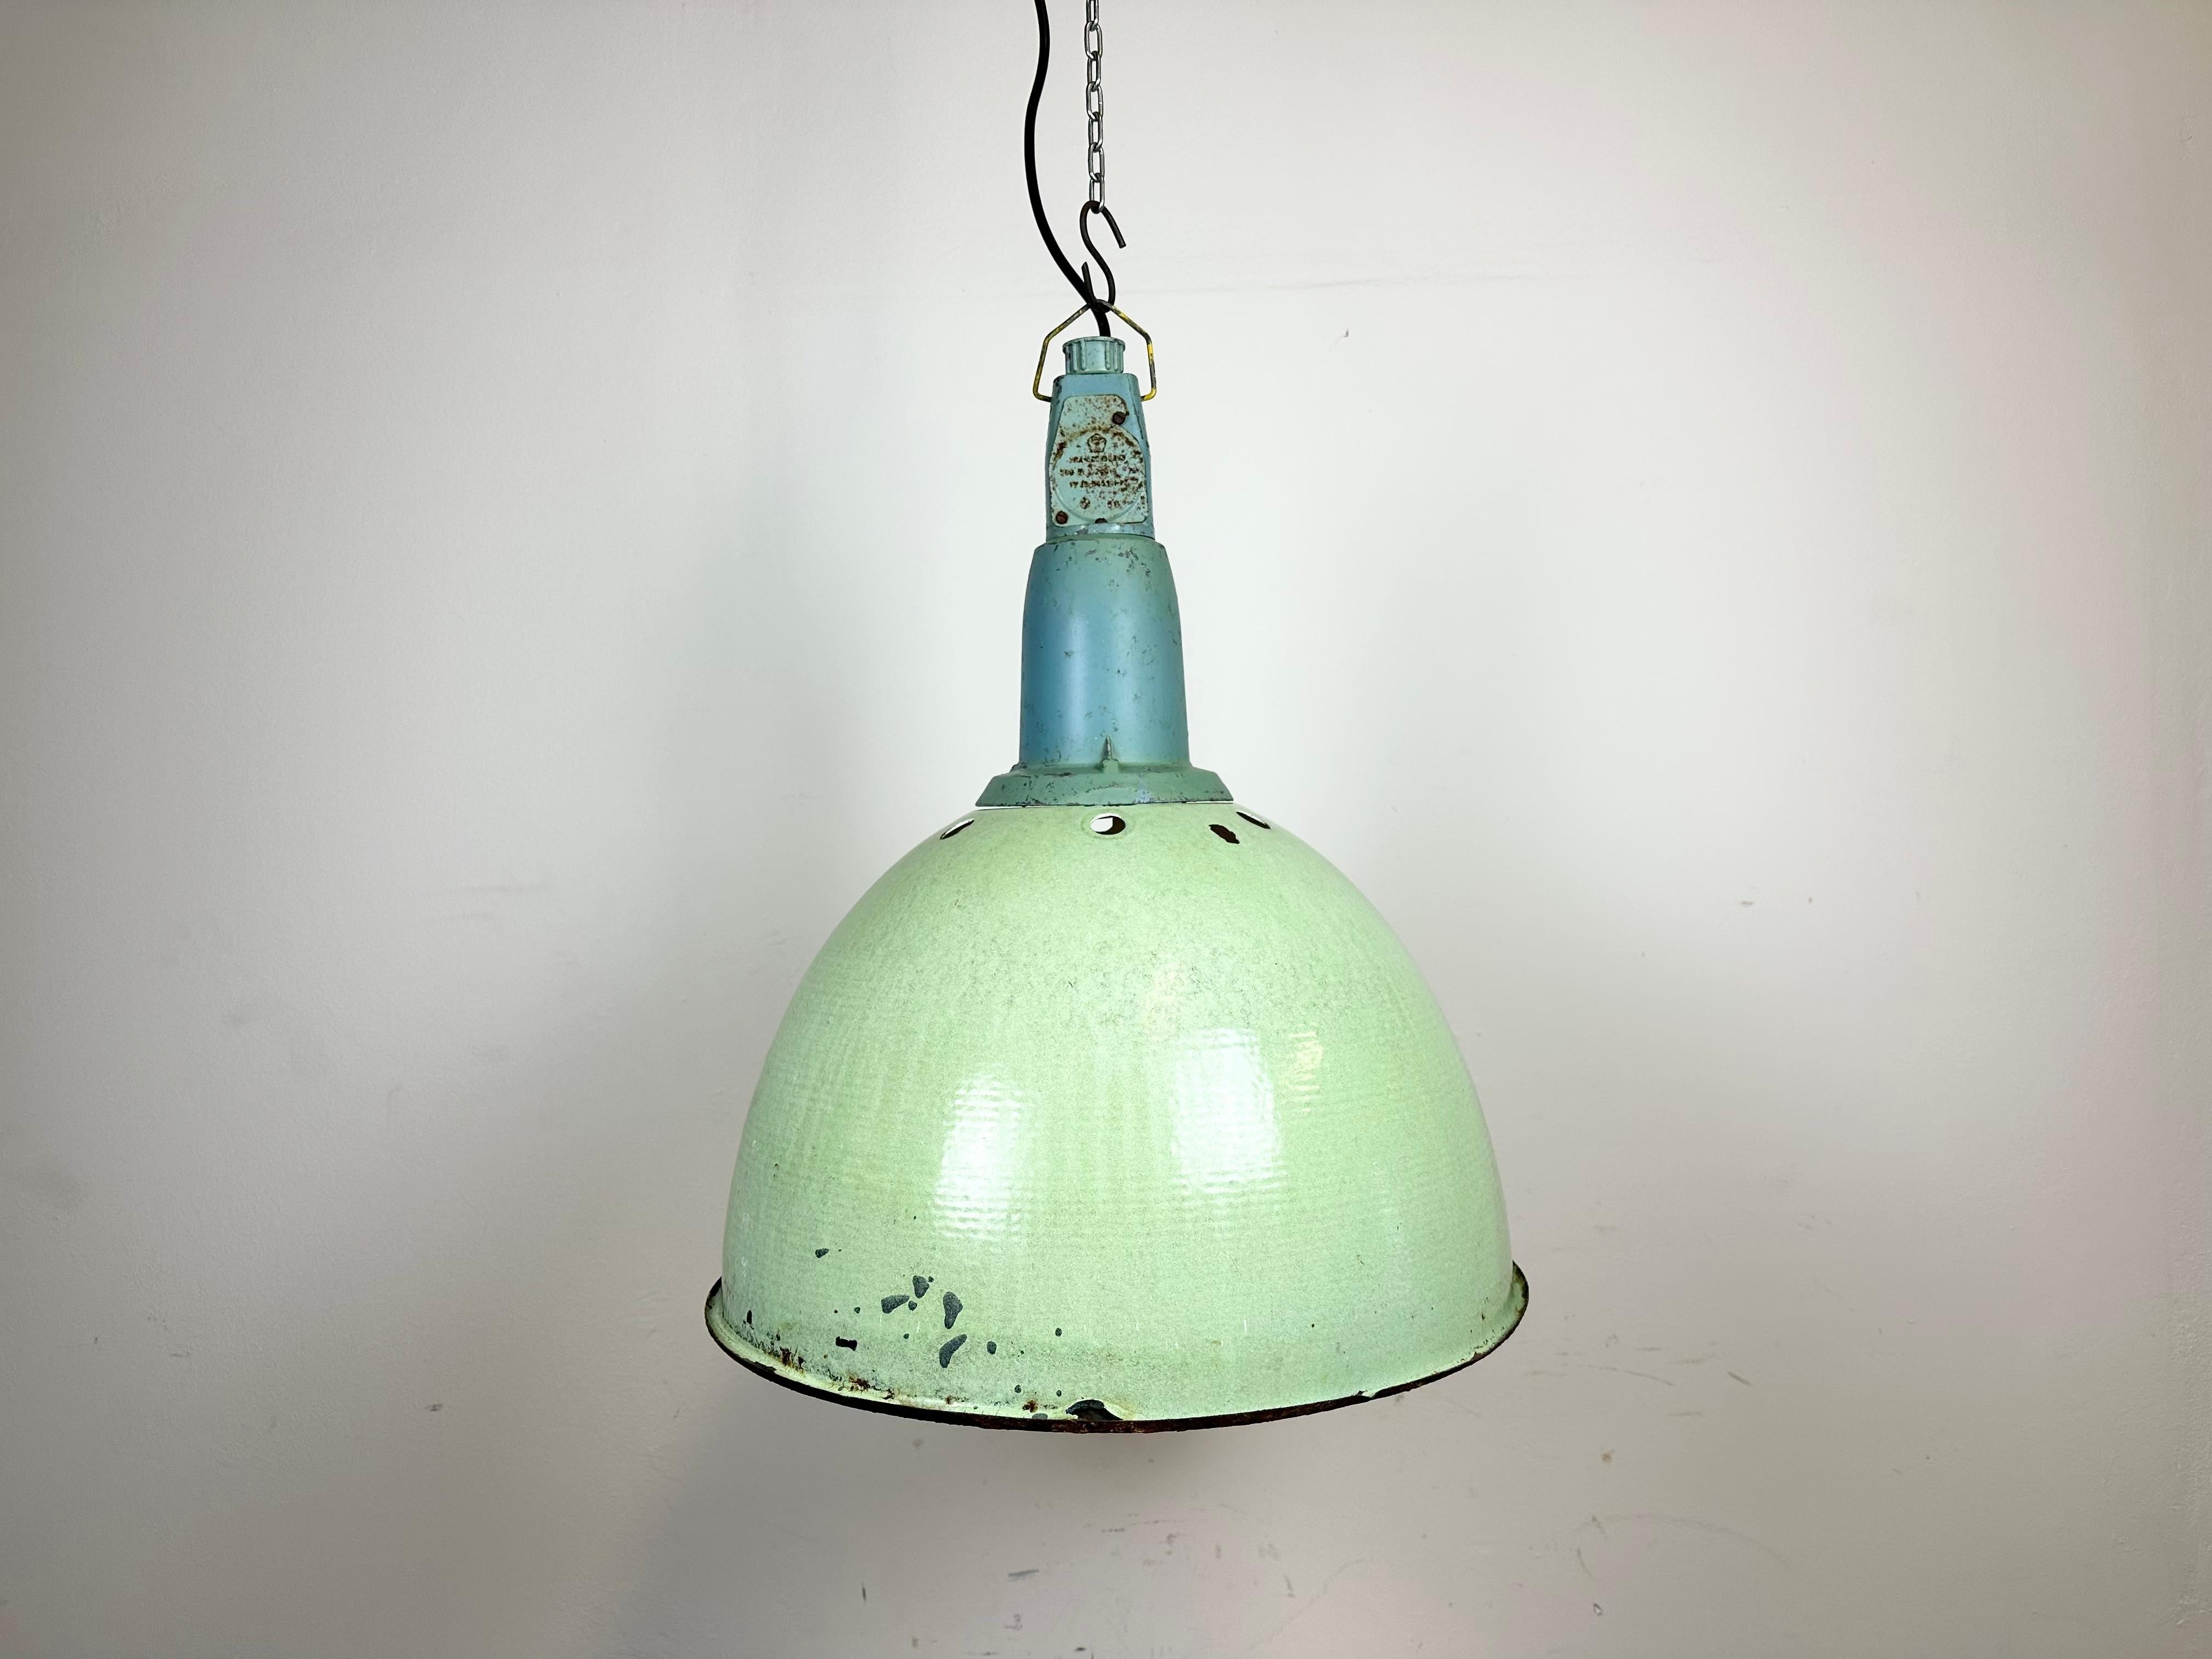 - Vintage Industrial lamp from the 1960s 
- Made in former Soviet Union
- Green enamel shade
- Cast aluminium top 
- Socket requires E 27 lightbulbs 
- New wire 
- Lampshade diameter: 45 cm
- Weight : 3.4 kg.